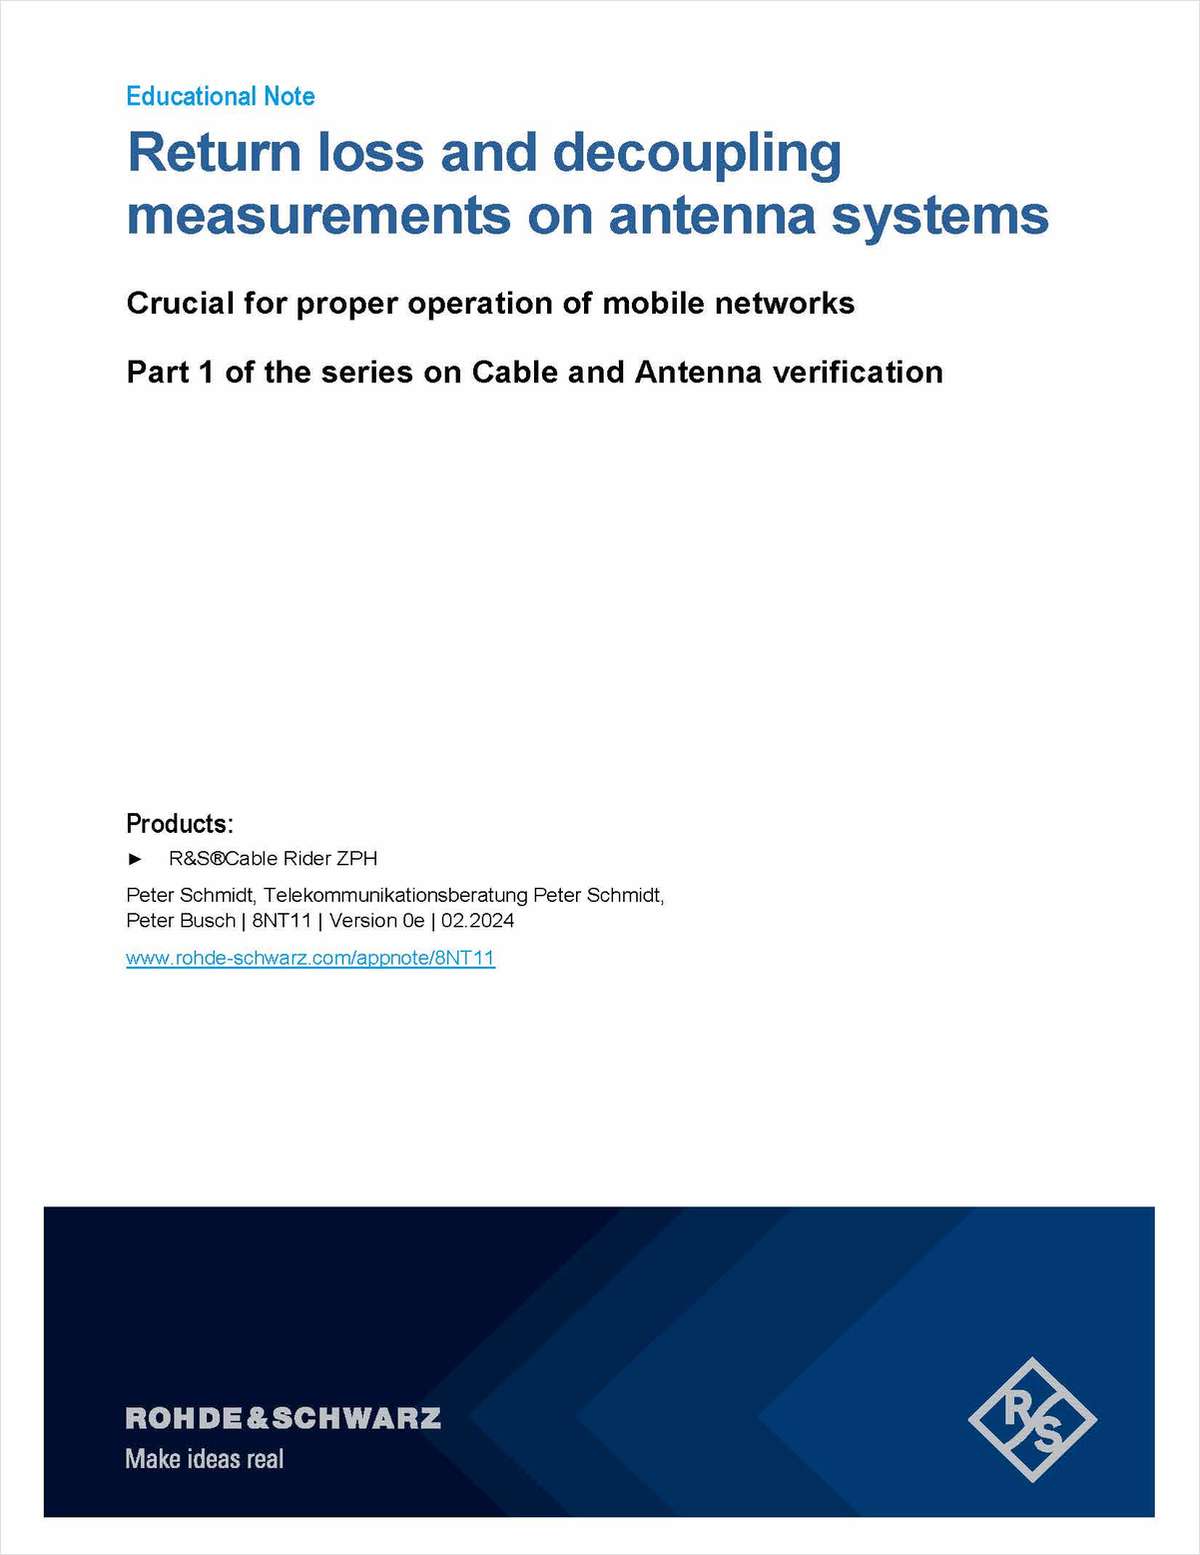 EduNote: Return loss and decoupling measurements on antenna systems